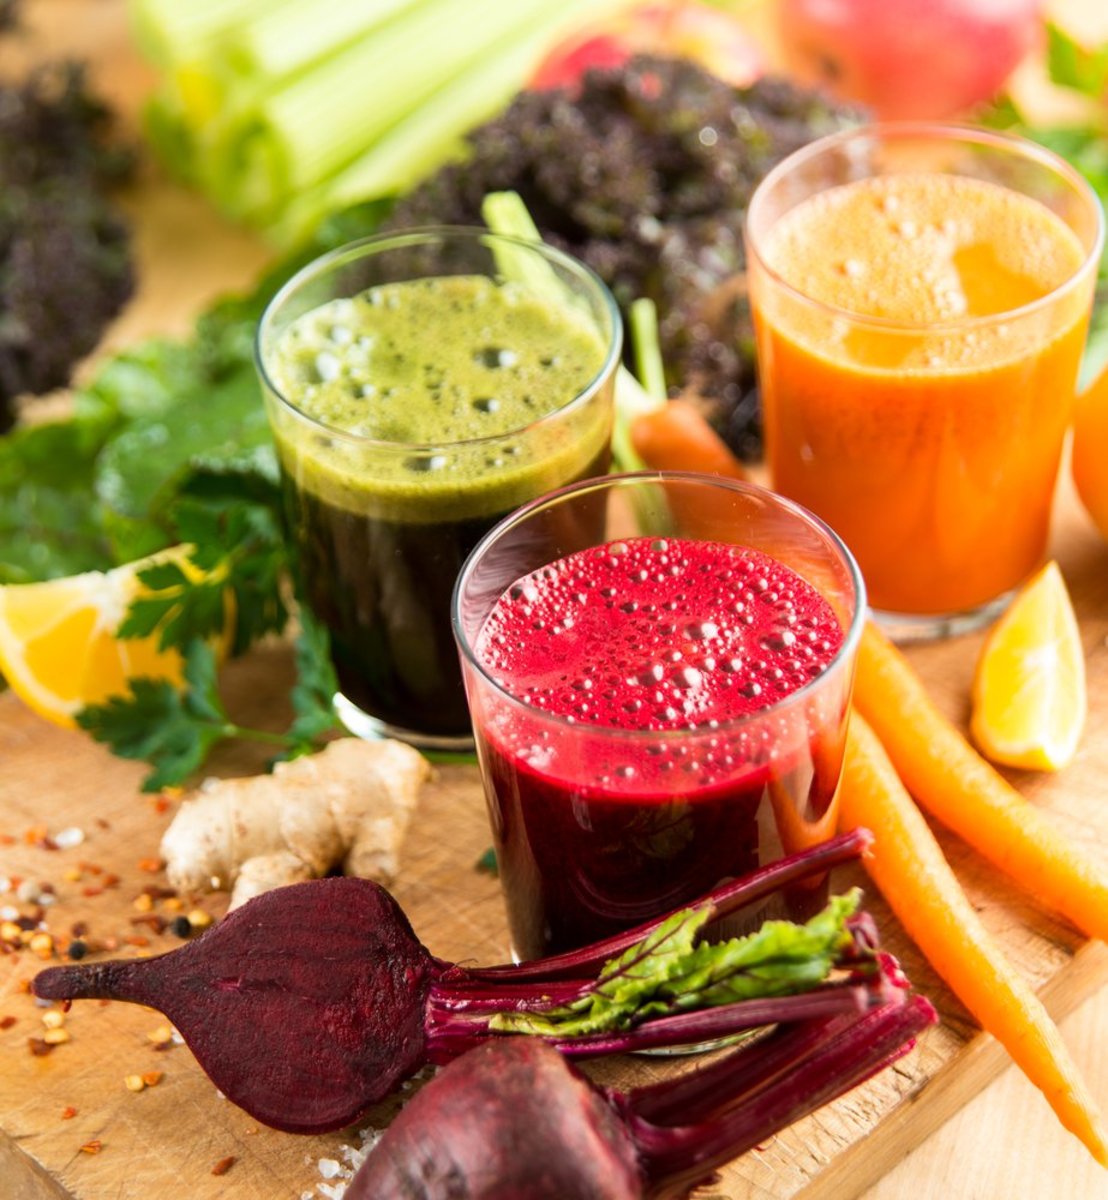 Is Your Green Juice Detox Hurting You? 9 Tips to Keep Your Juice Safe